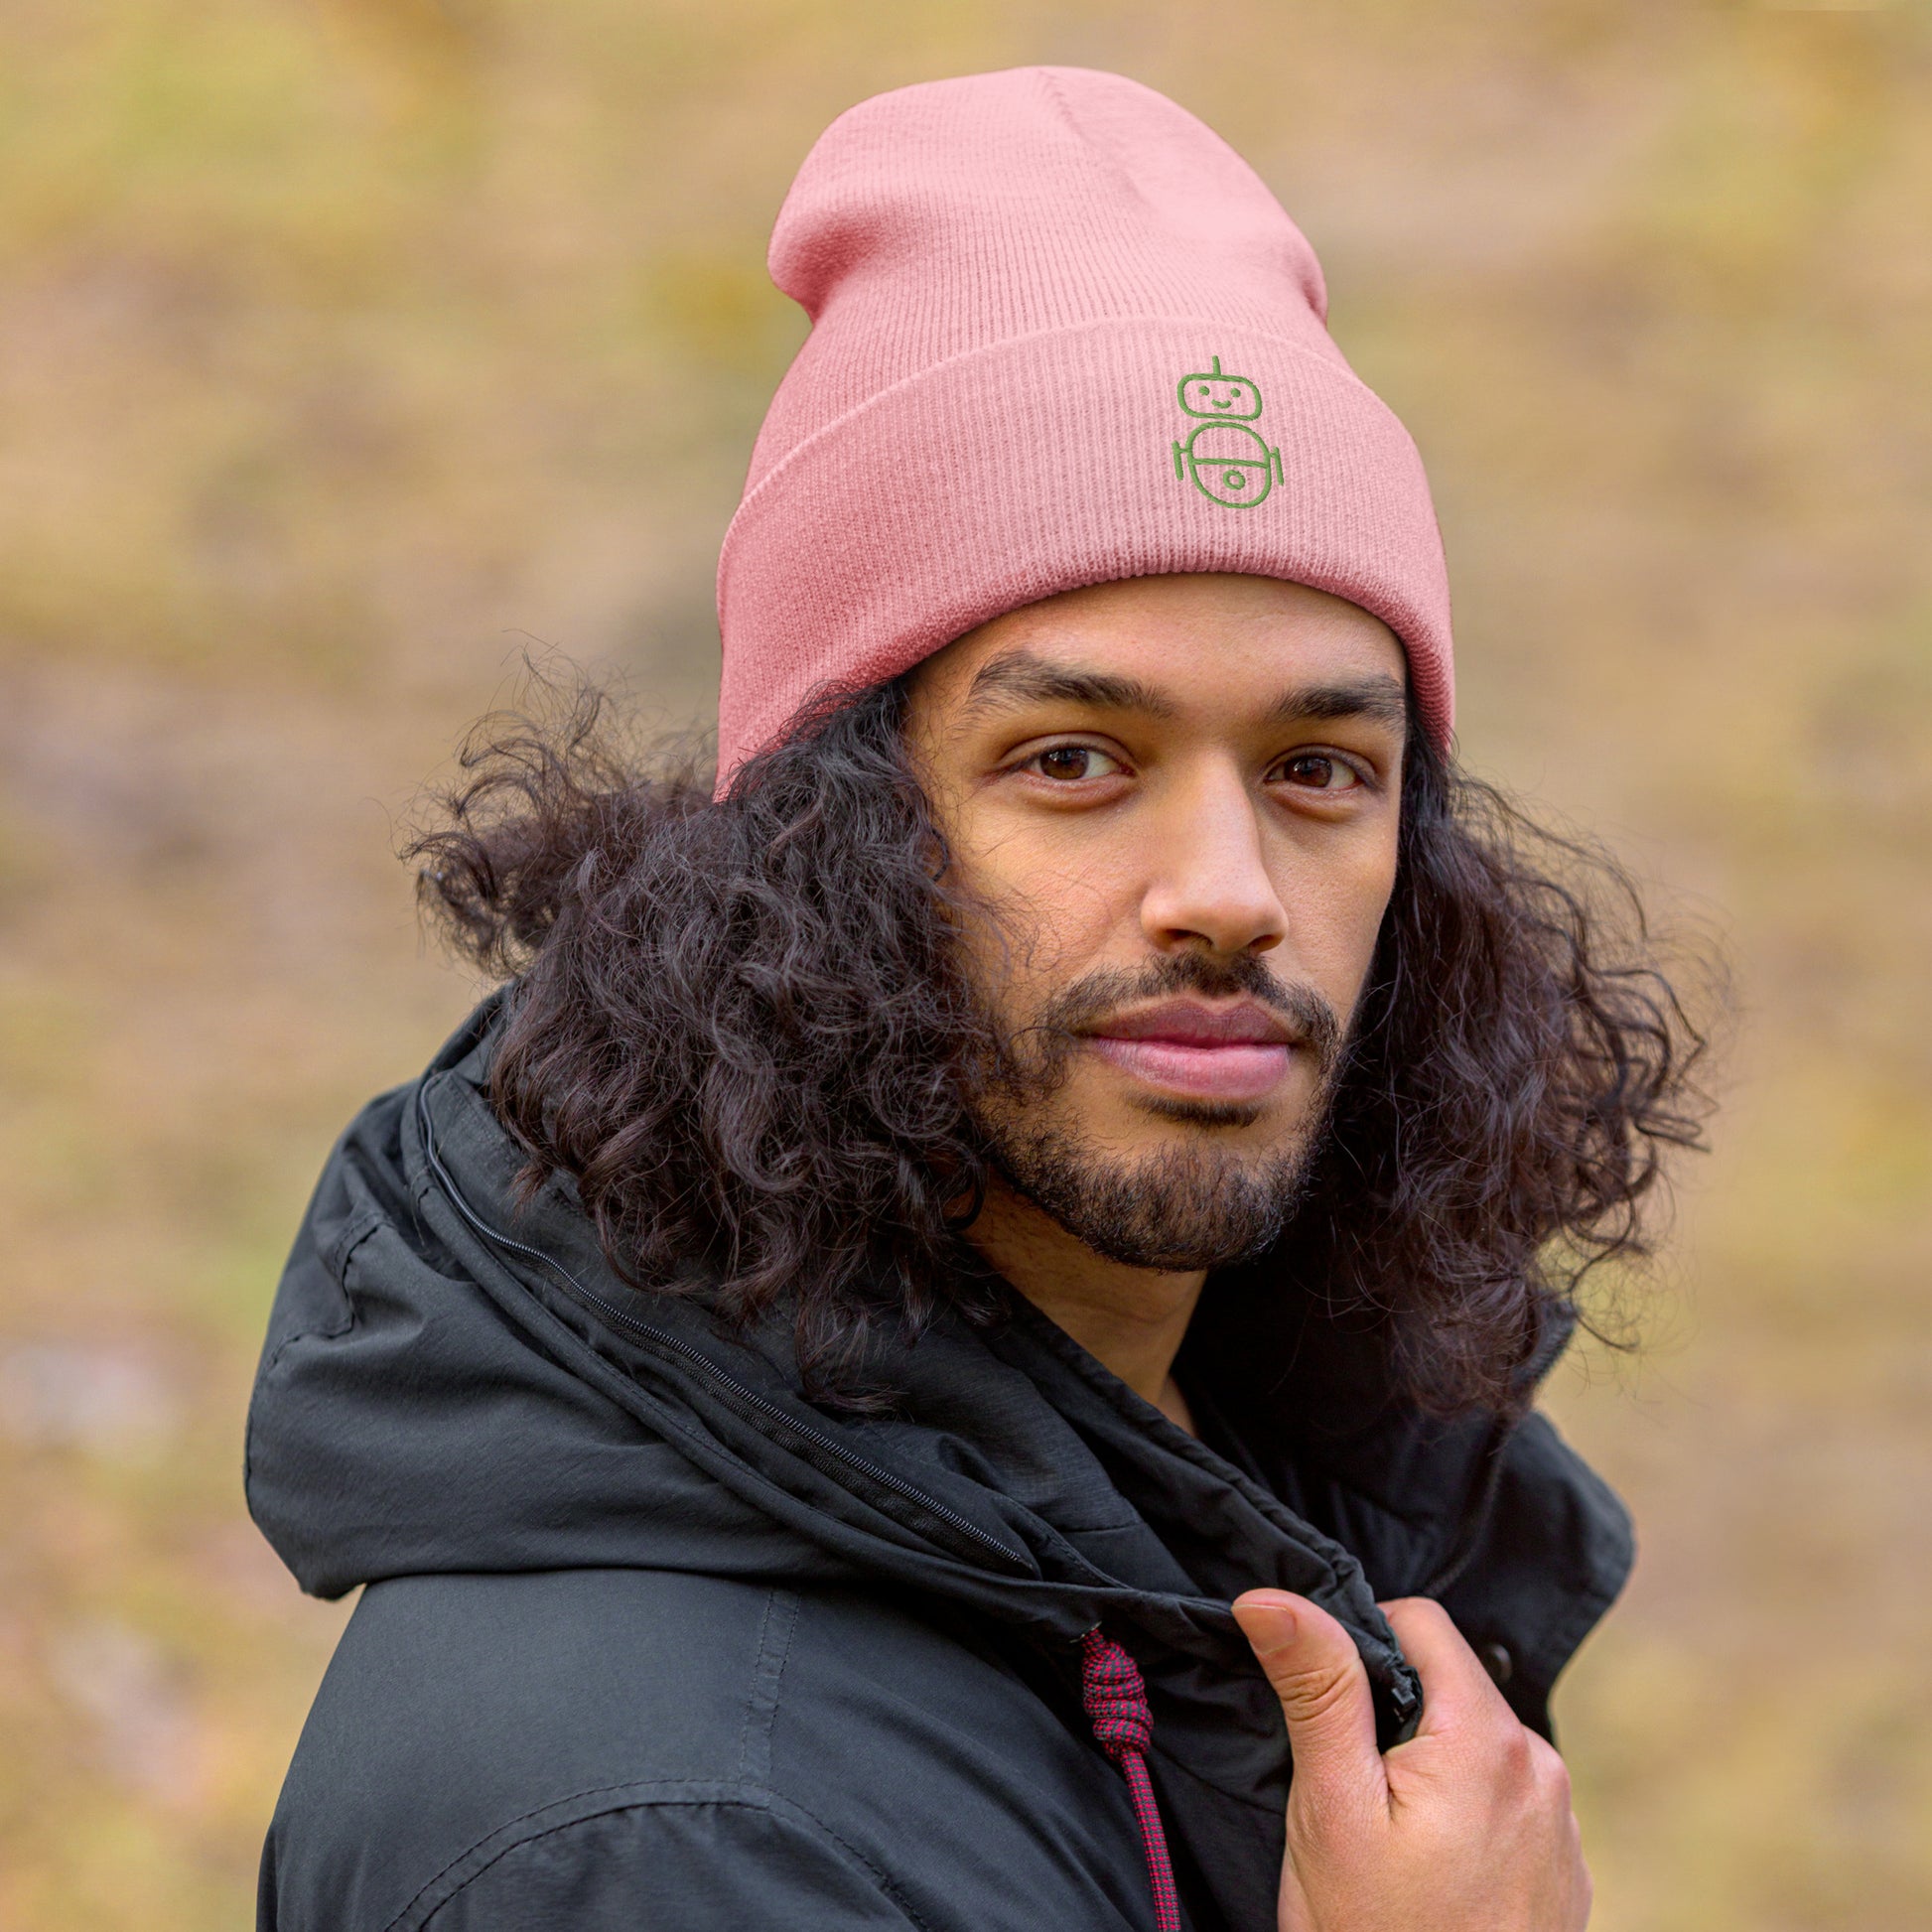 Men with pink beanie and Android logo in green